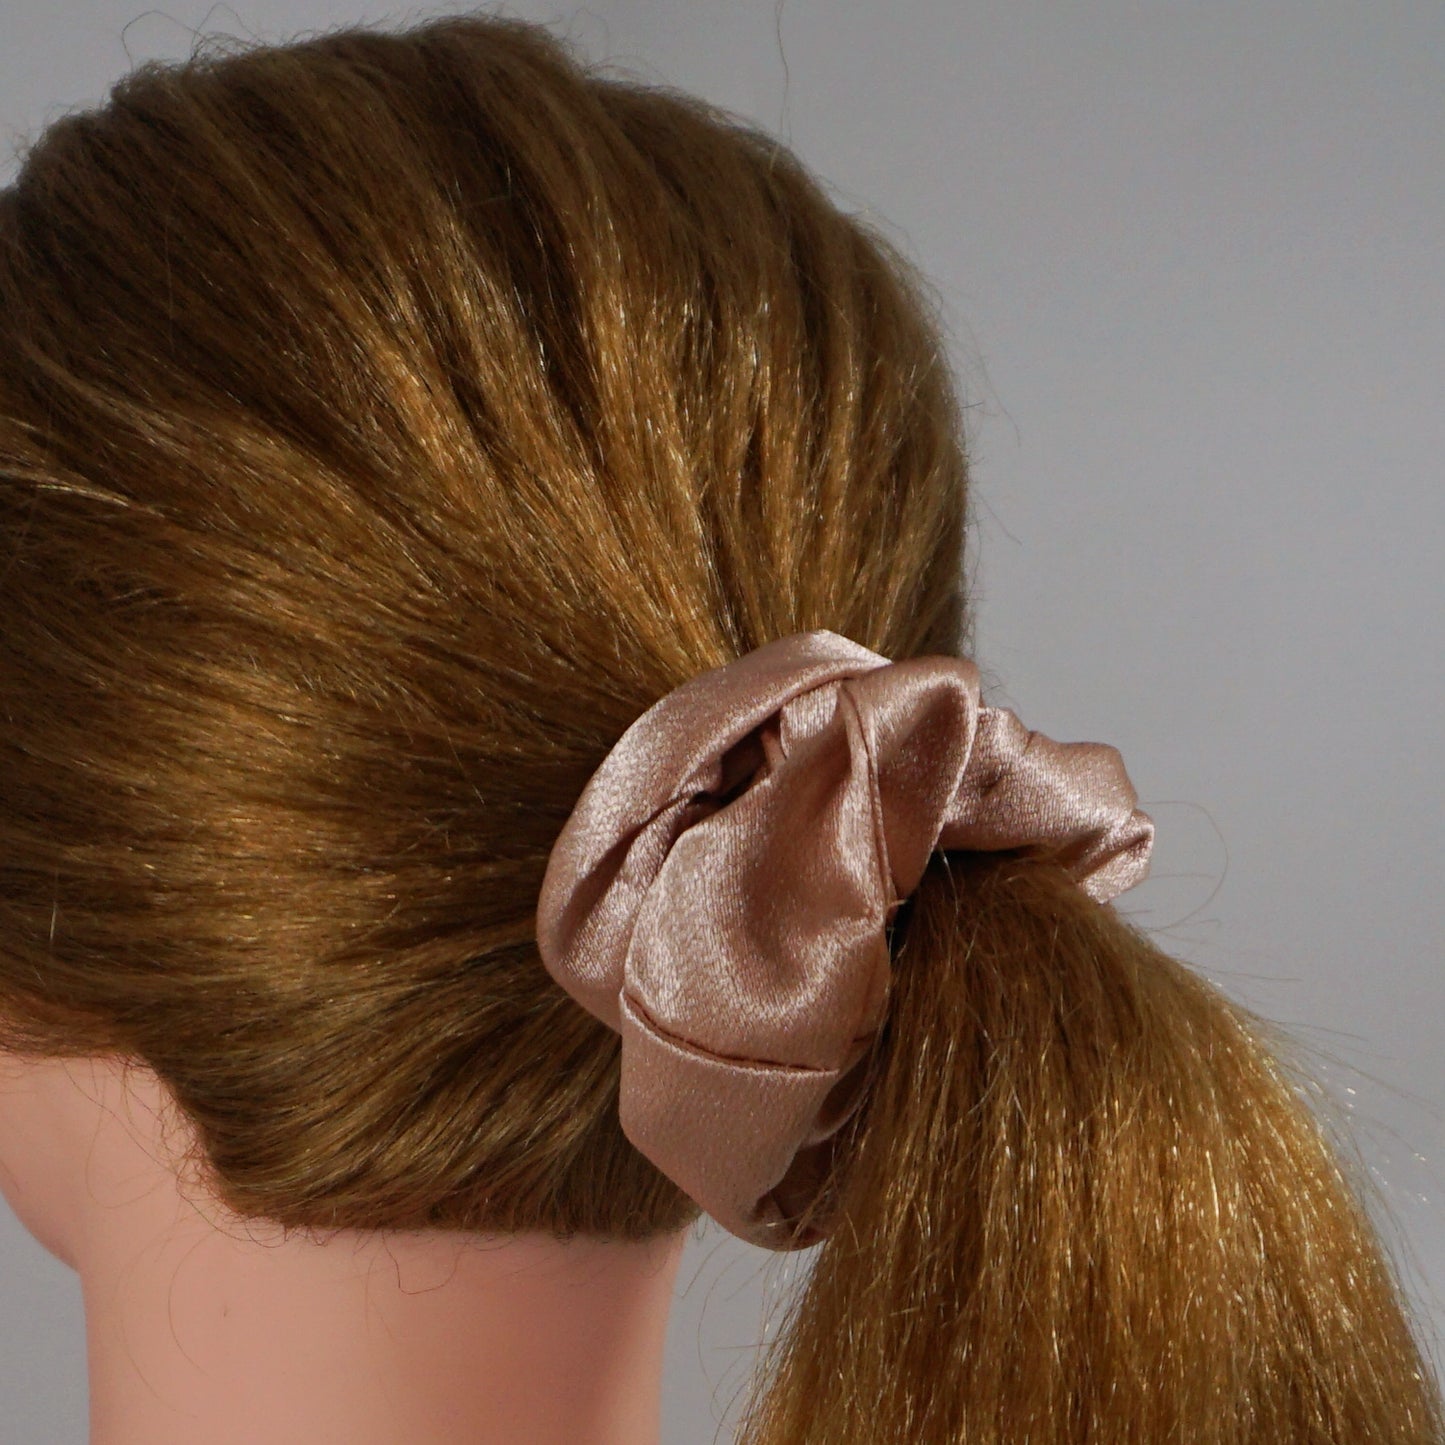 Amelia Beauty Products, Tan Scrunchies, 4.5in Diameter, Gentle on Hair, Strong Hold, No Snag, No Dents or Creases. 6 Pack